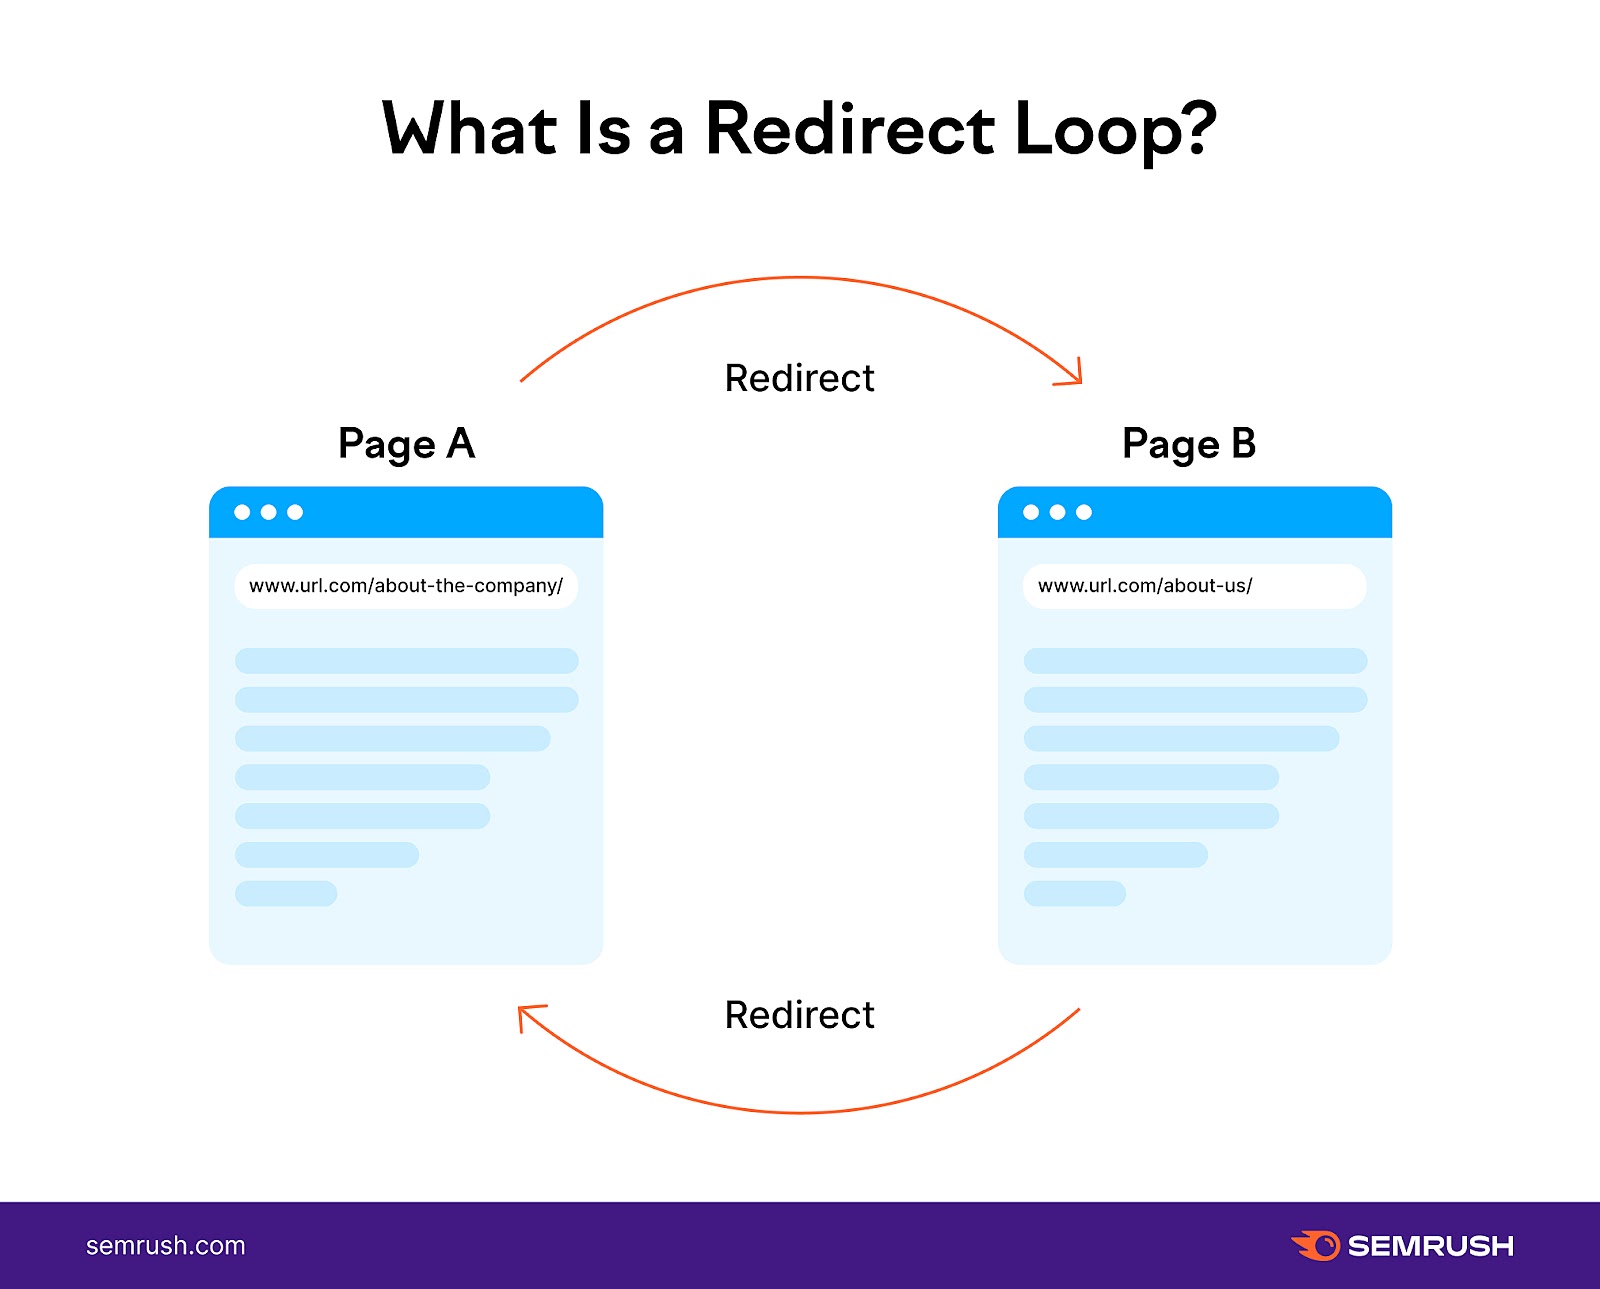 An image showing a redirect loop, from page A to page B